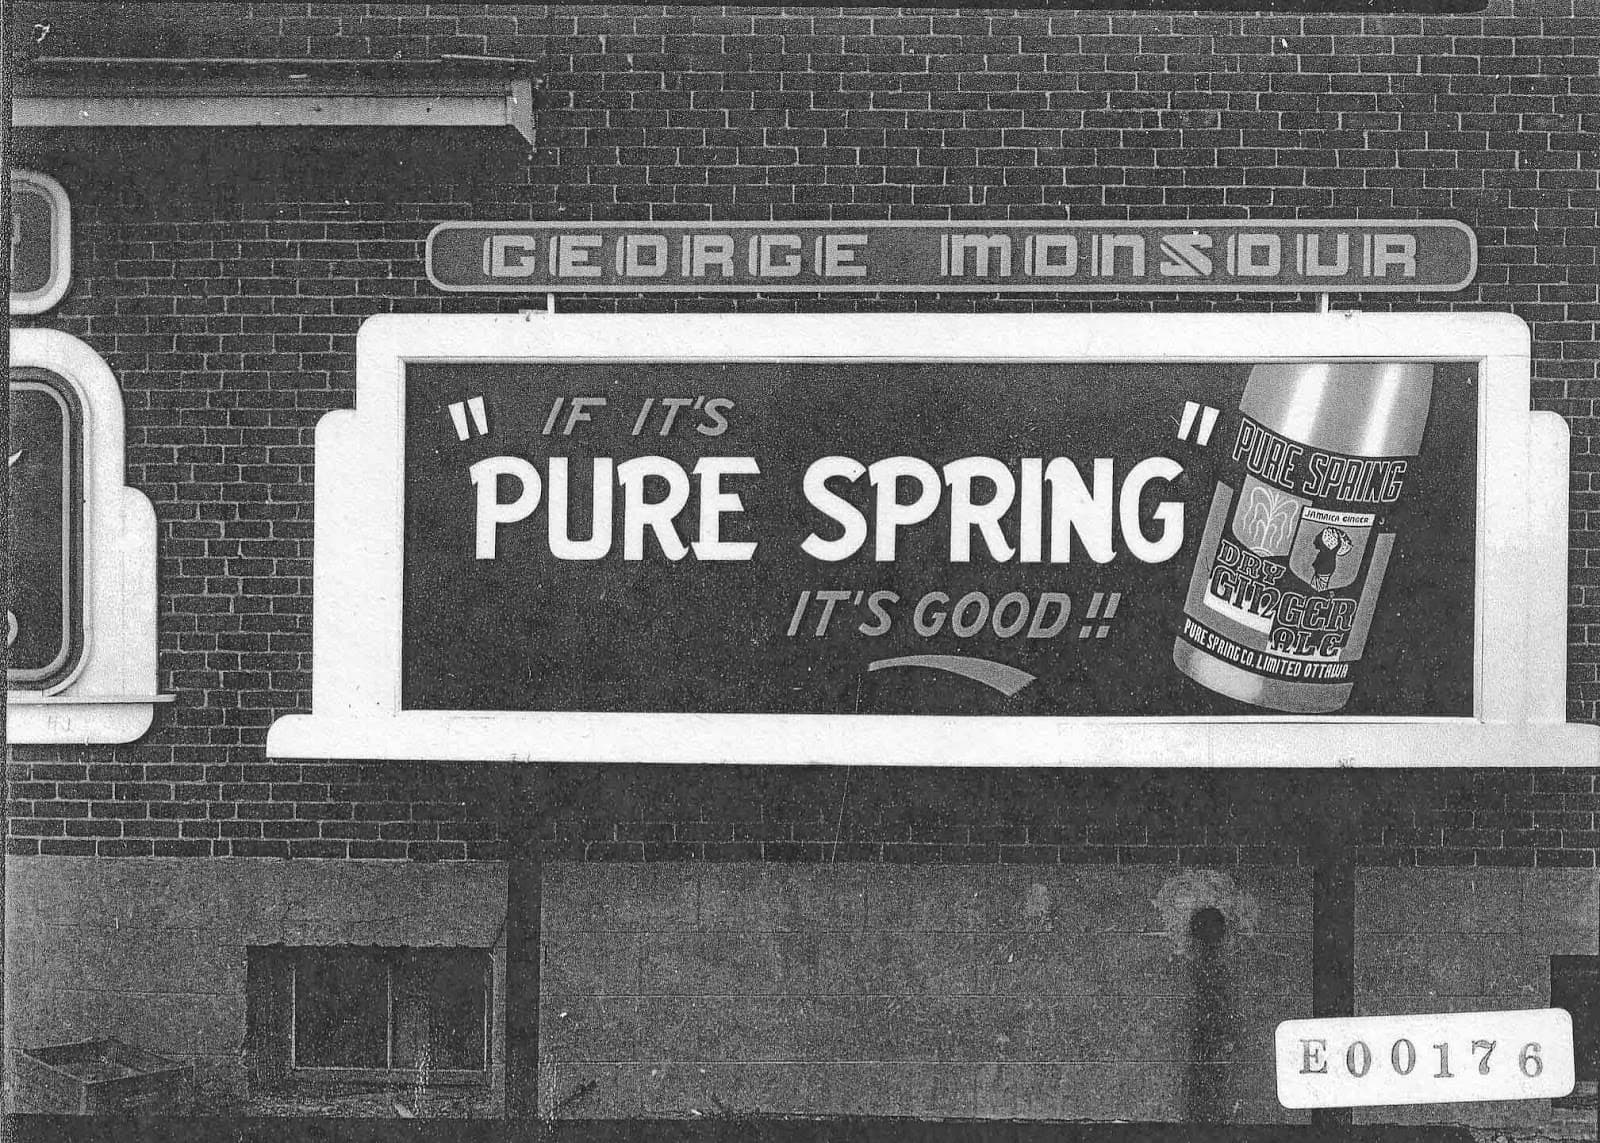 The Pure Spring billboard which was located on the side of the Westboro Confectionery - April 8 1946 (source: E00176 Sproul collection, City of Ottawa Archives) (this photo is just a placeholder - I am waiting for the colour original from the Archives)